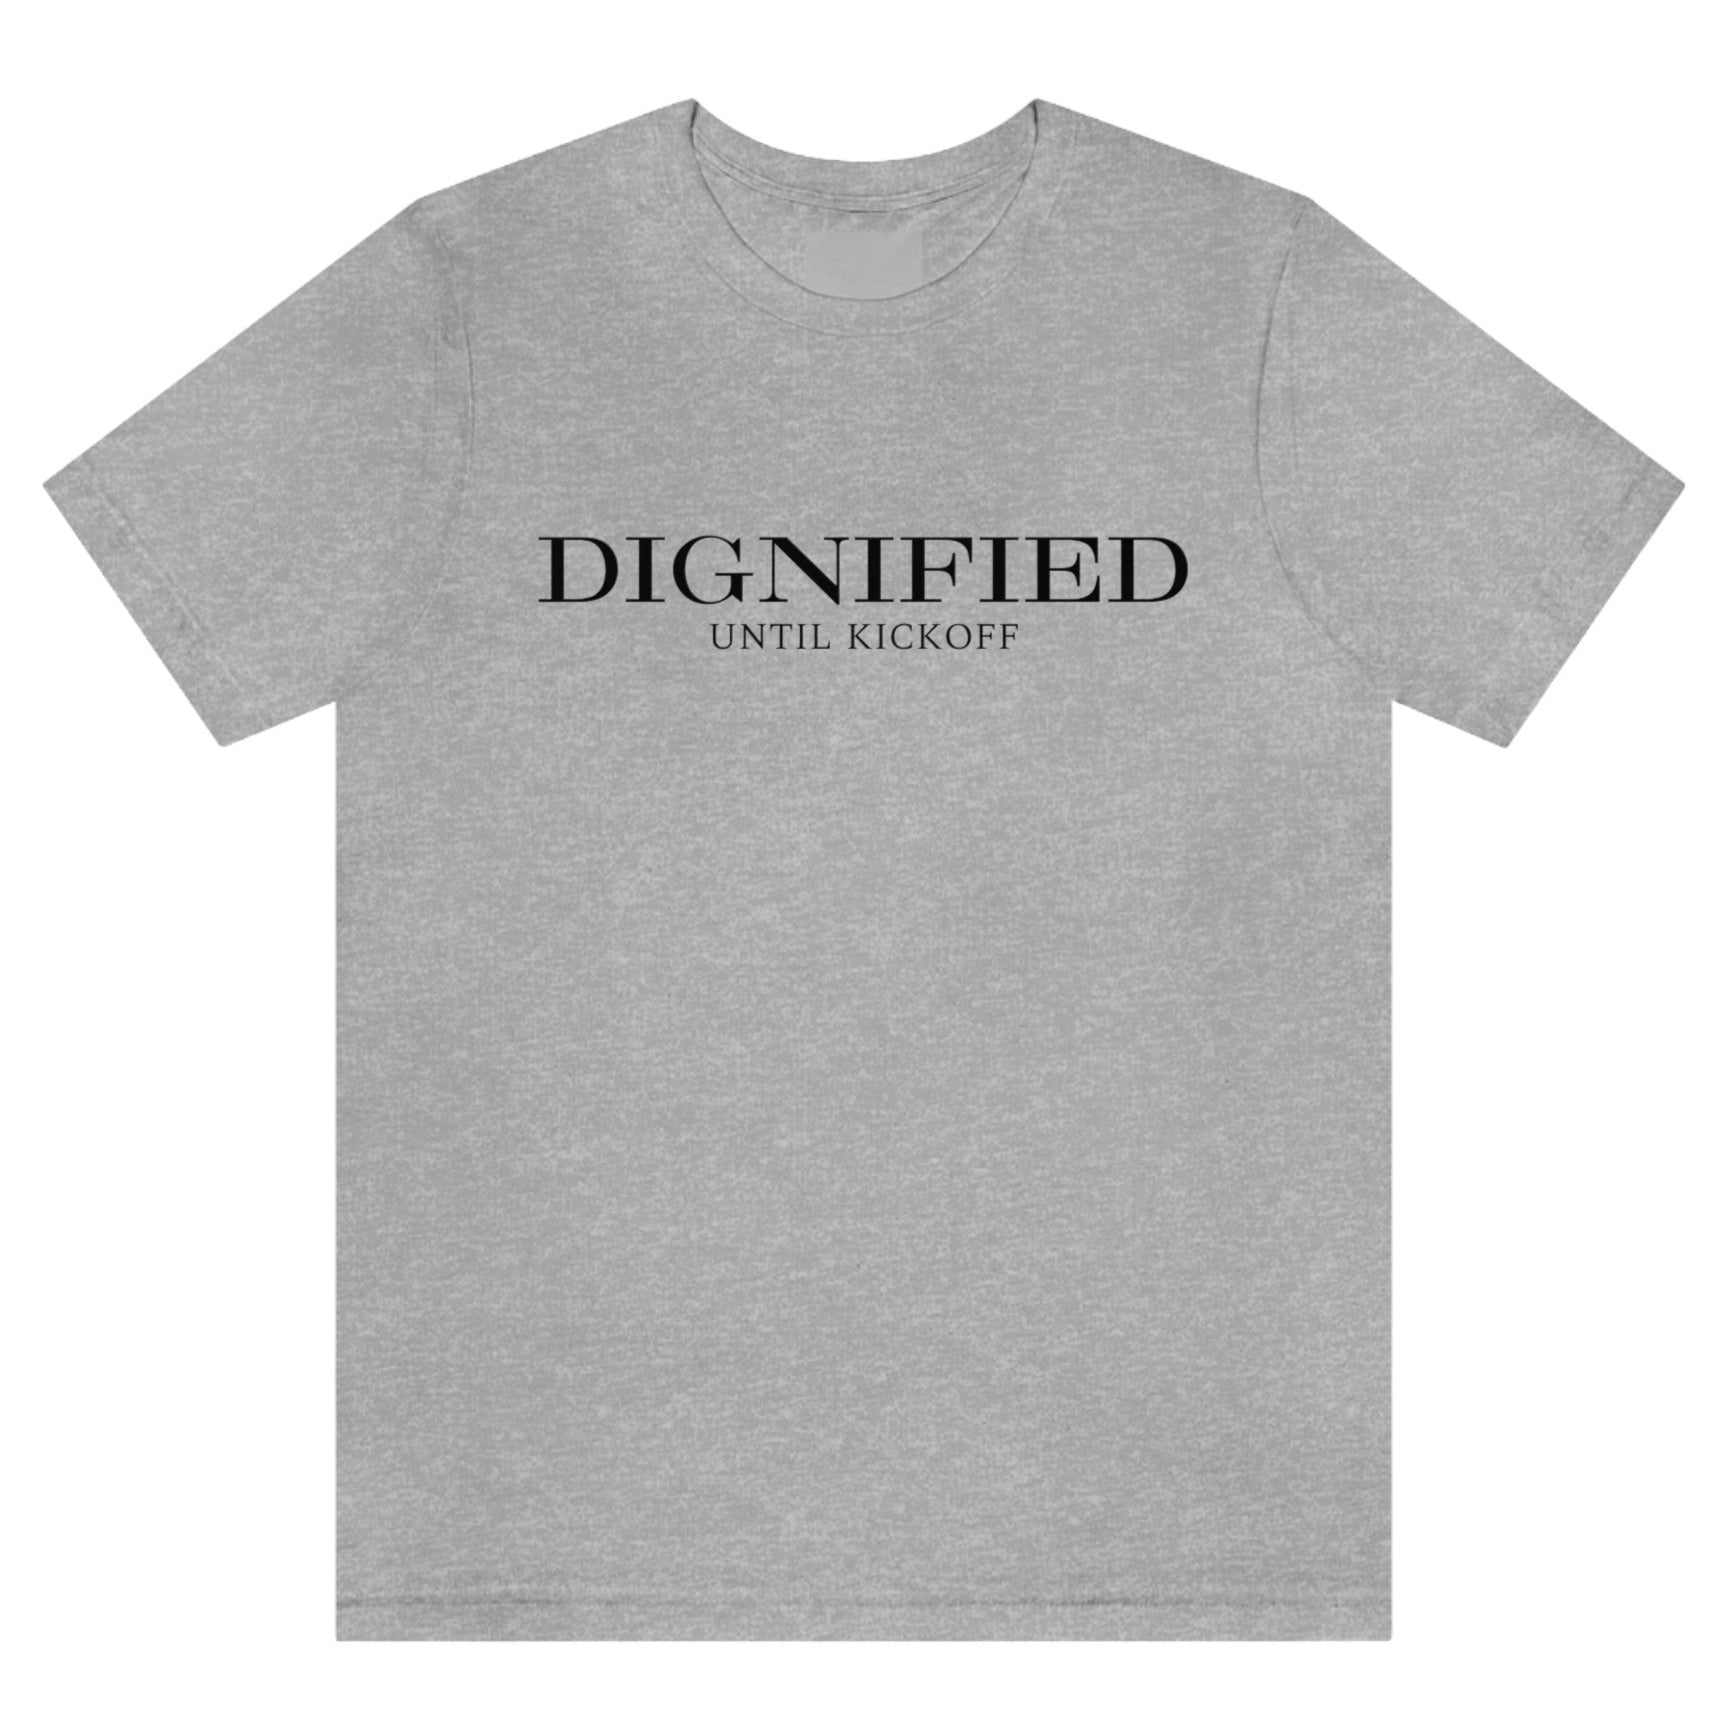 dignified-until-kick-off-athletic-heather-t-shirt-mens-sports-football-soccer